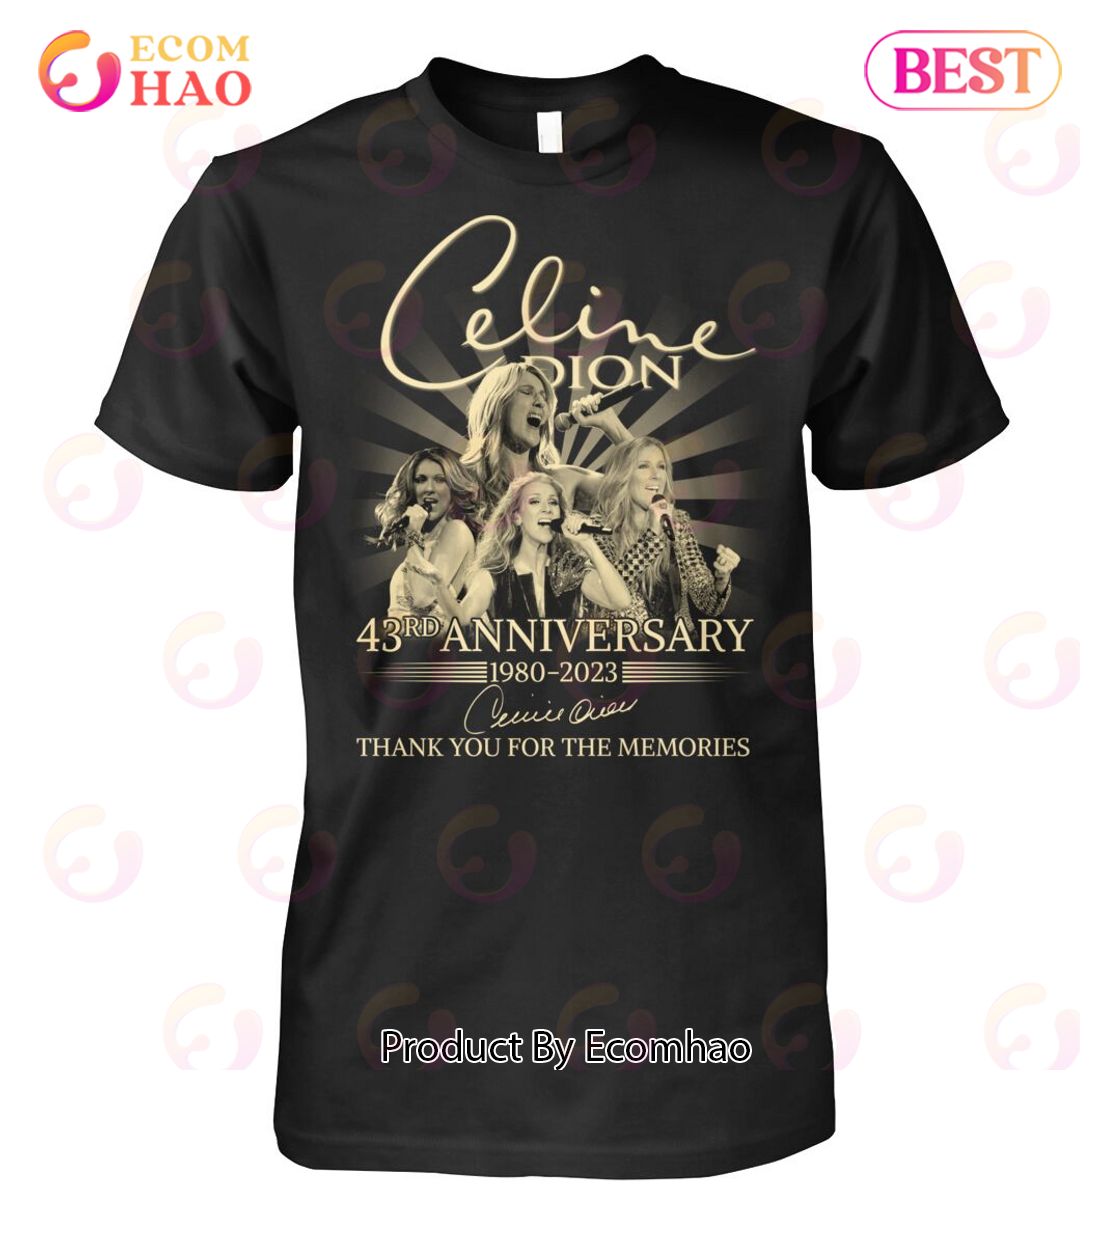 Celine Dion 43rd Anniversary 1980 – 2023 Thank You For The Memories T-Shirt